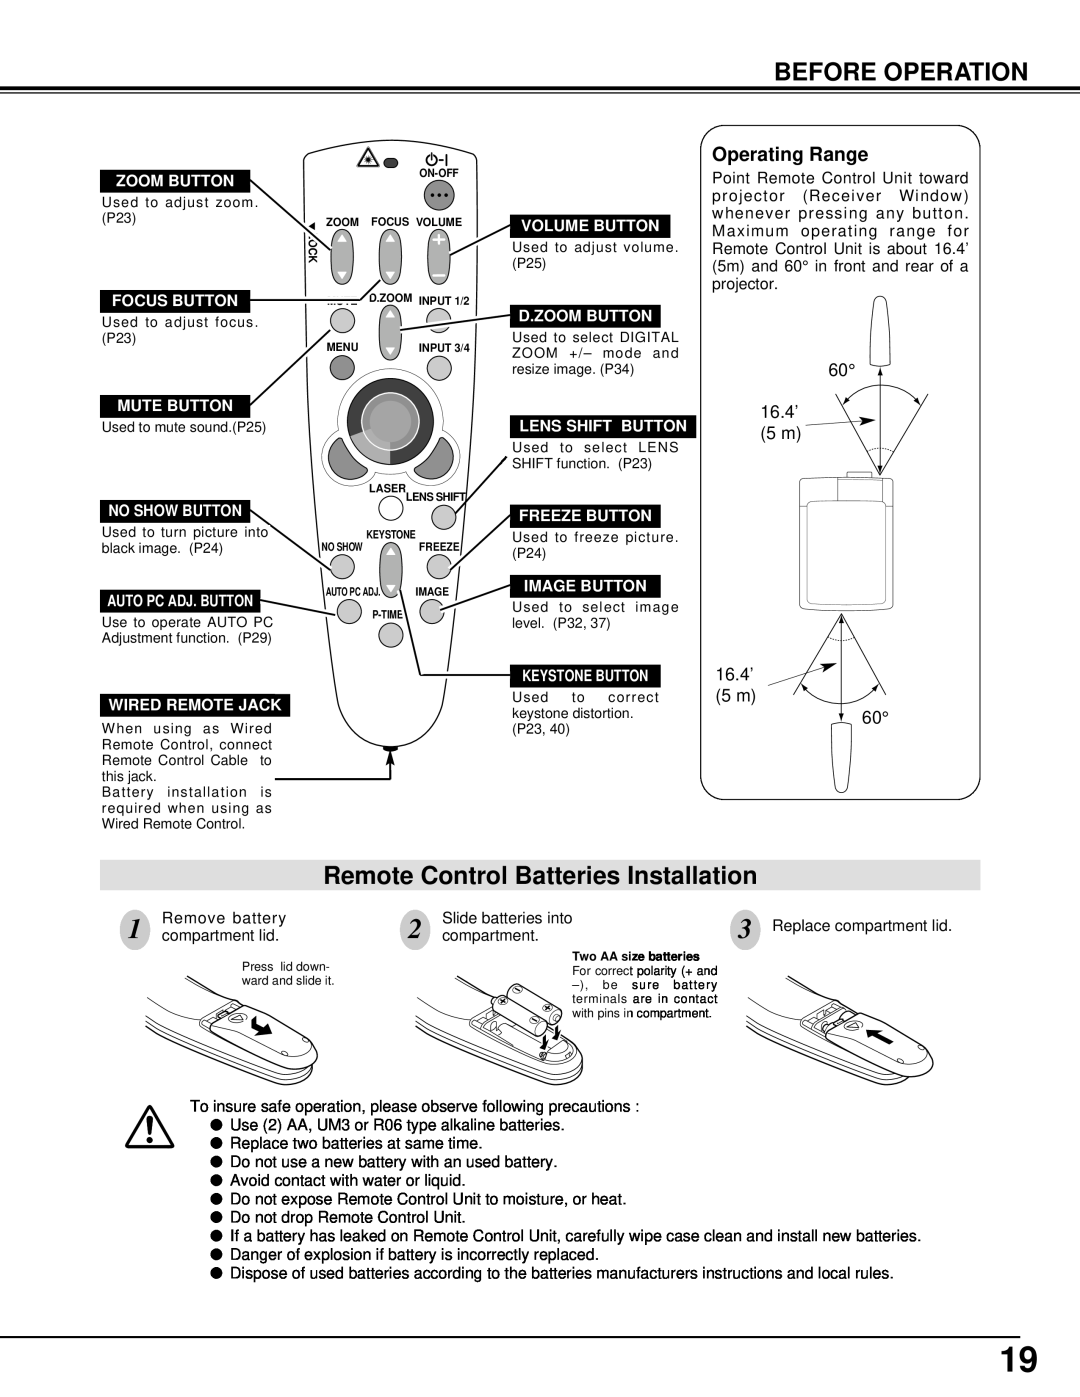 Eiki LC-XT2 instruction manual Before Operation, Remote Control Batteries Installation, Operating Range 